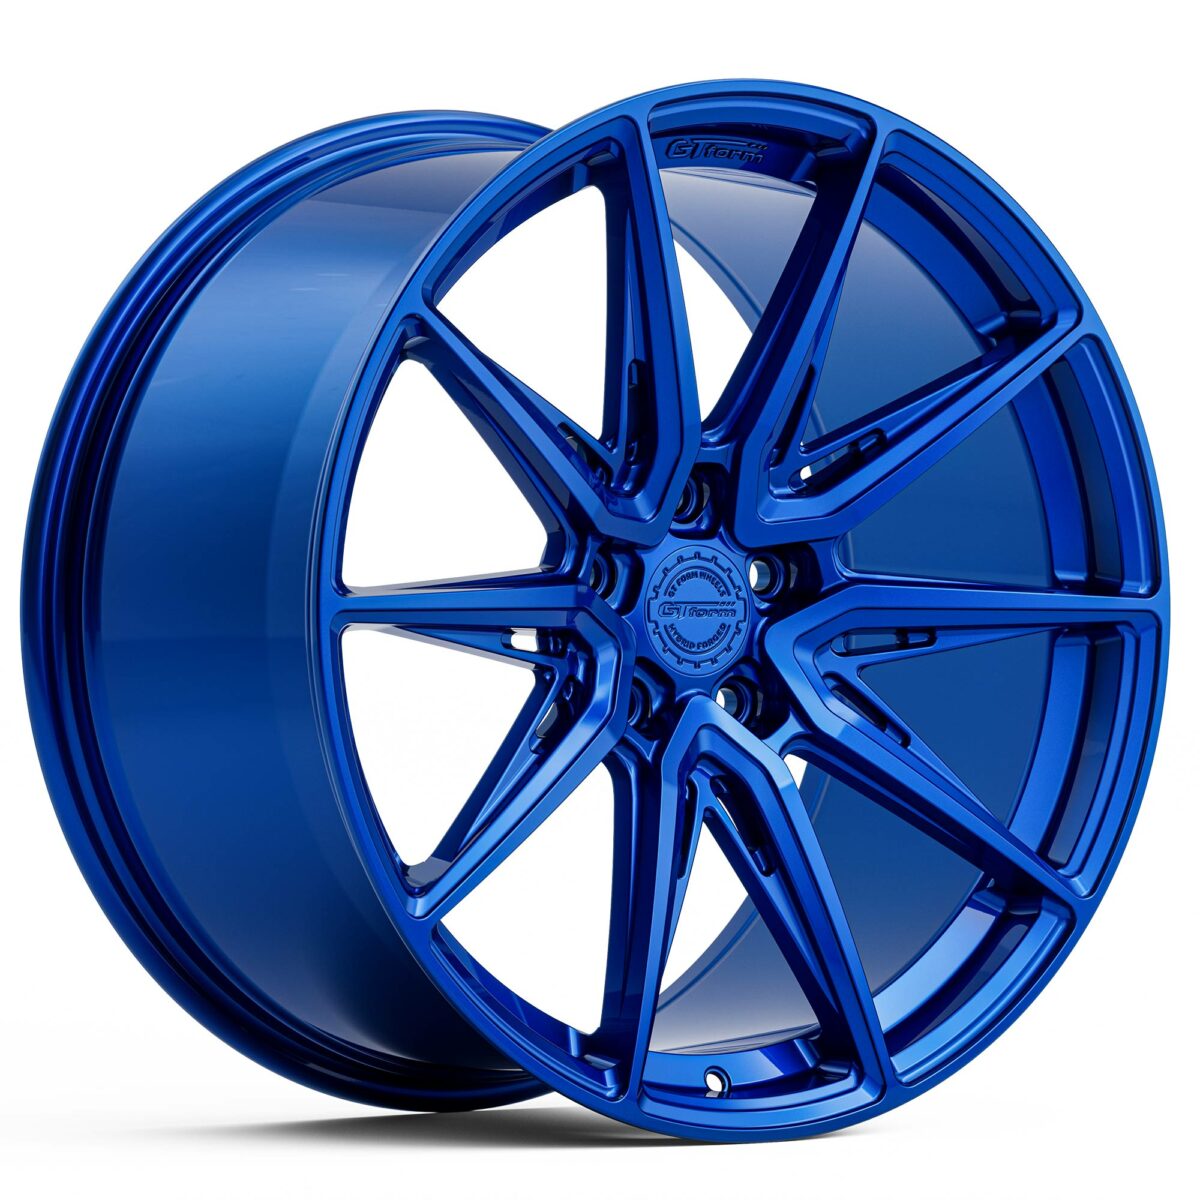 PERFORMANCE WHEELS GT FORM HF4.1 HYBRID FORGED ILLUSION BLUE 20X9 20X10.5 20X12 STAGGERED RIMS